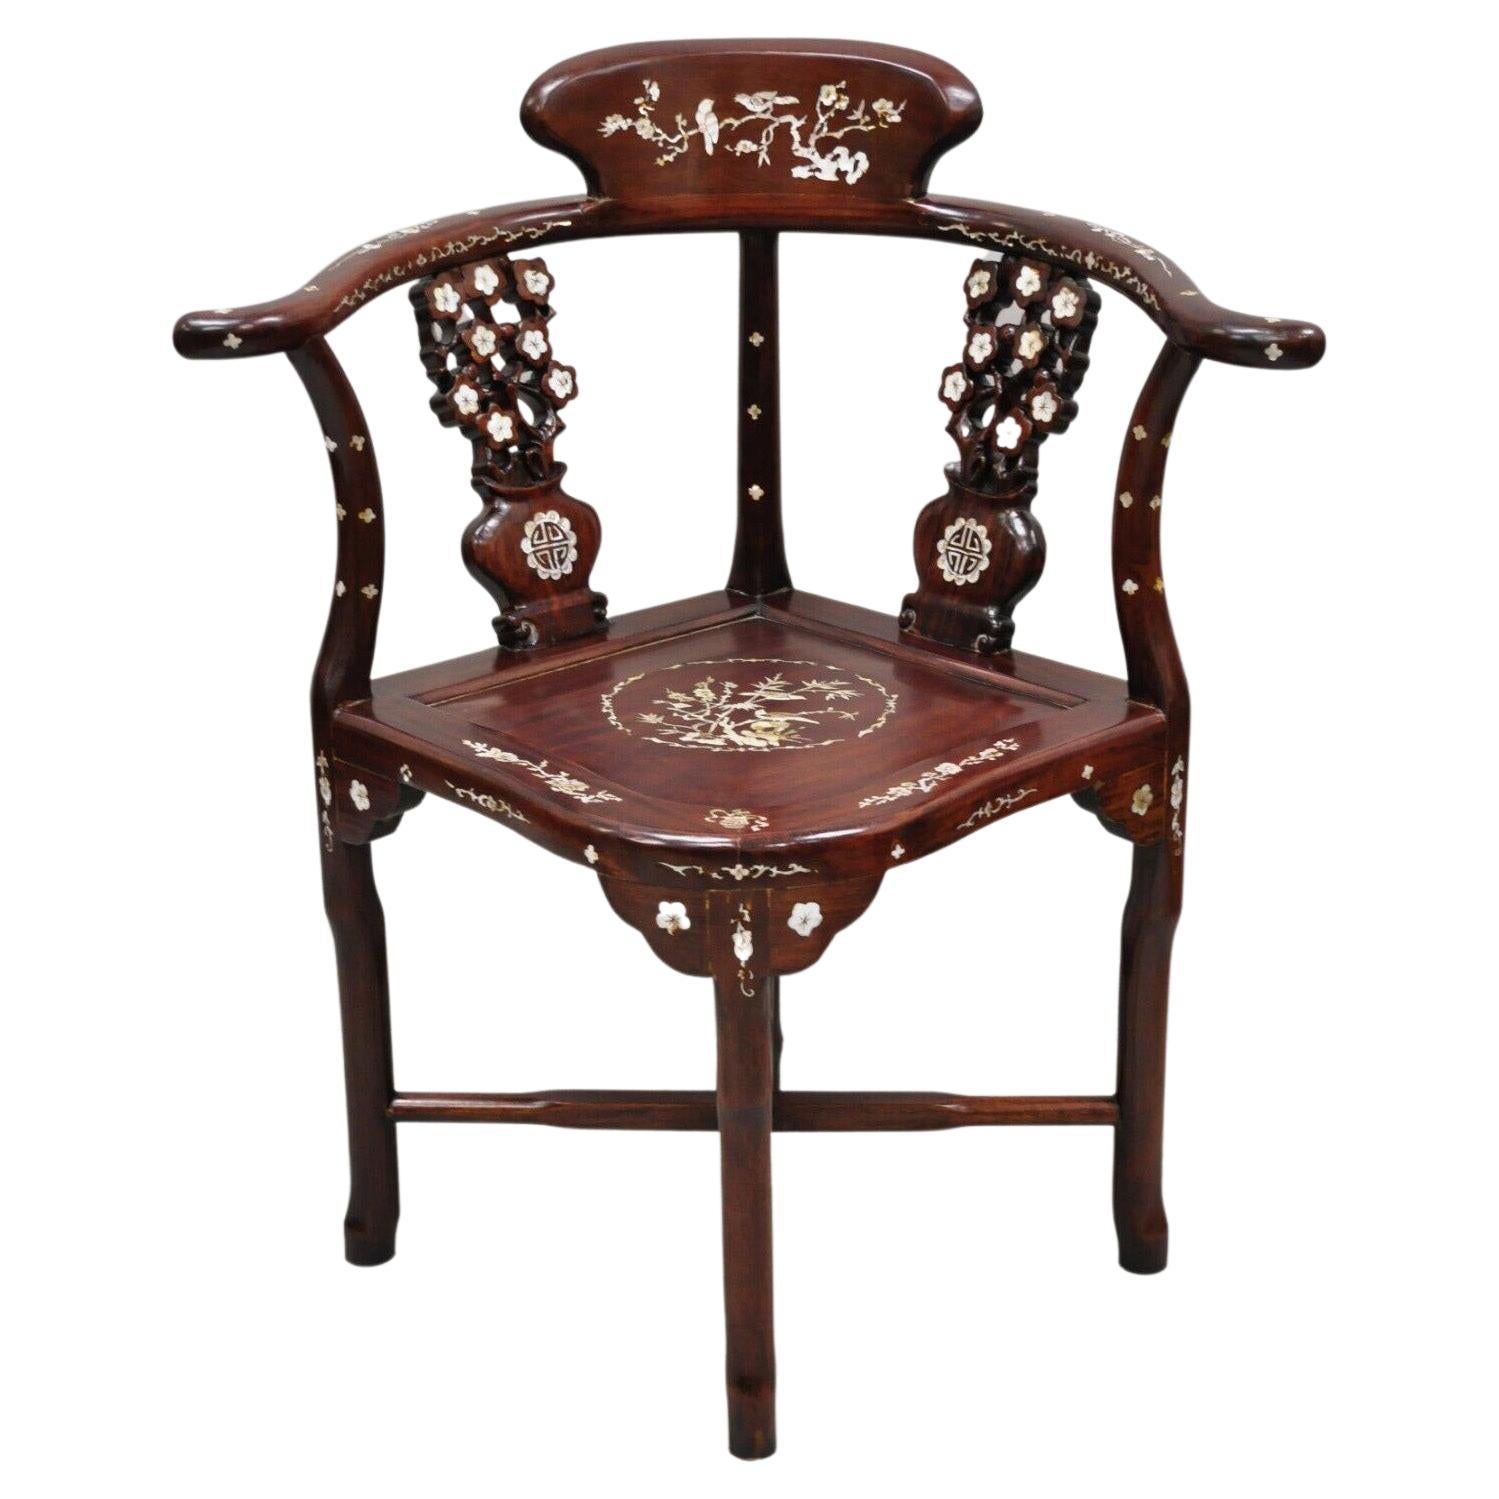 Vintage Chinese Carved Hardwood Corner Lounge Chair with Mother of Pearl Inlay For Sale